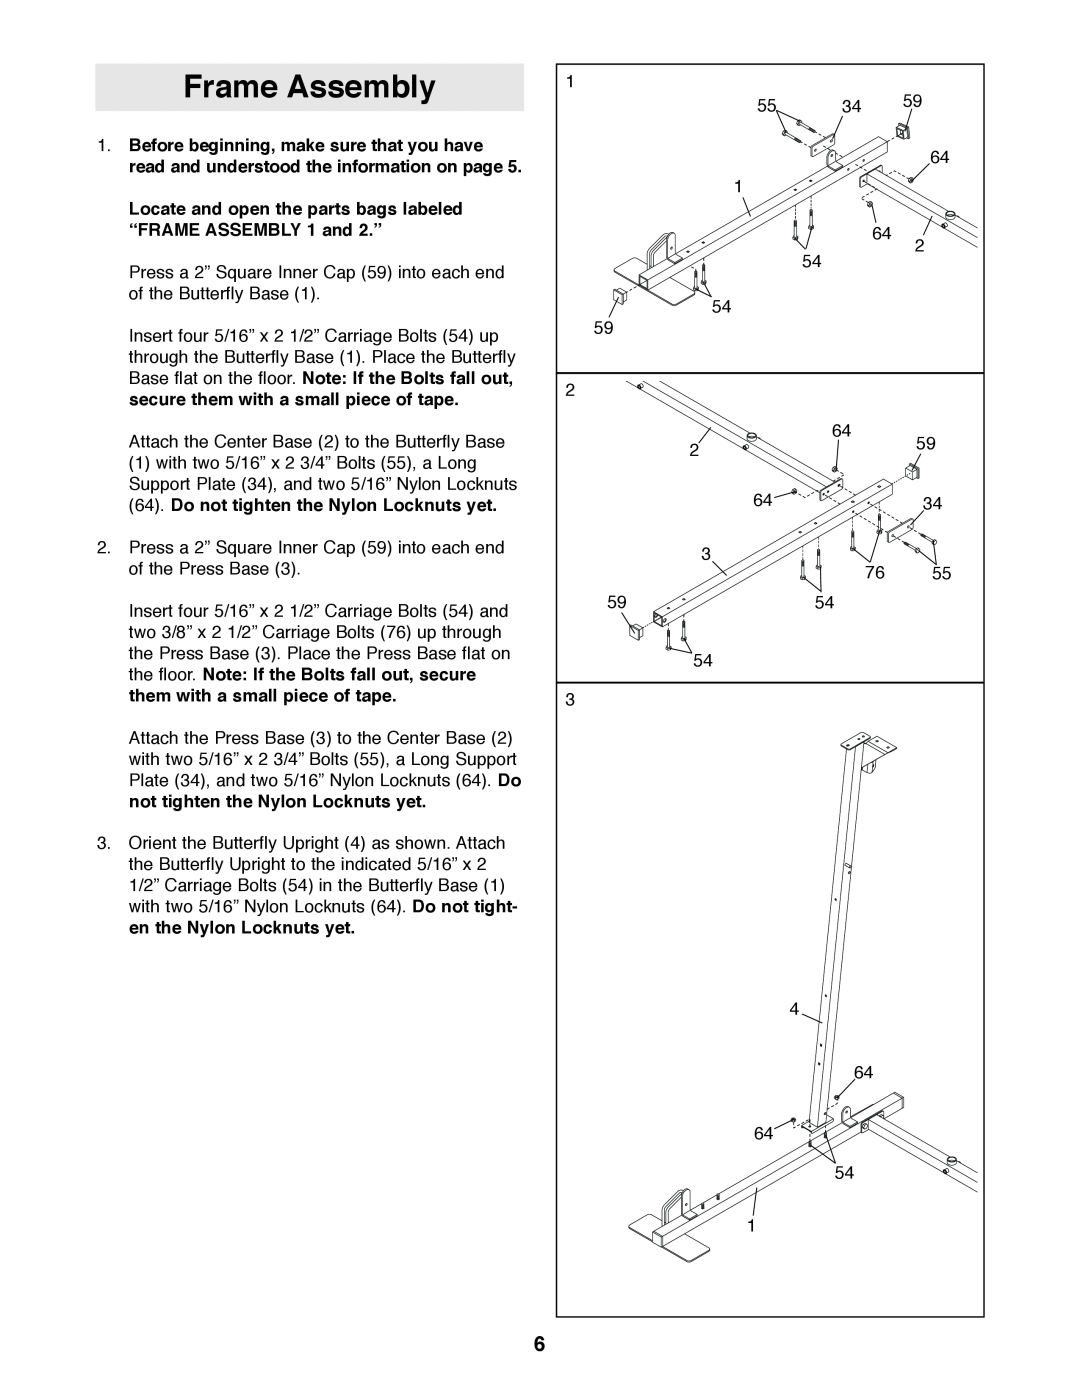 Weider 831.159530 user manual Frame Assembly, Locate and open the parts bags labeled “FRAME ASSEMBLY 1 and 2.” 